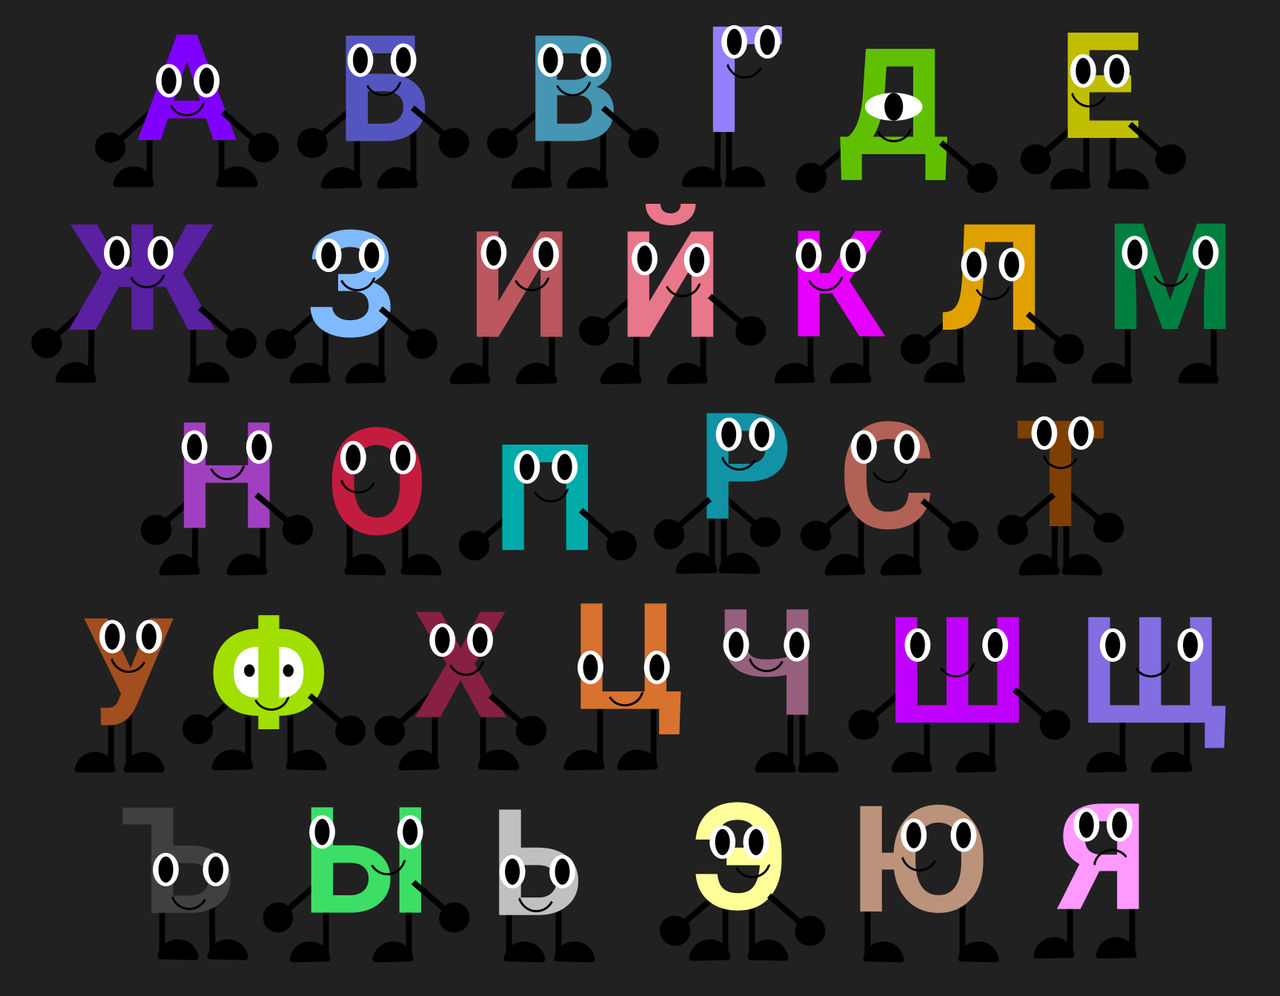 M.Rs music note (alphabet Lore style) by frankilpud on DeviantArt